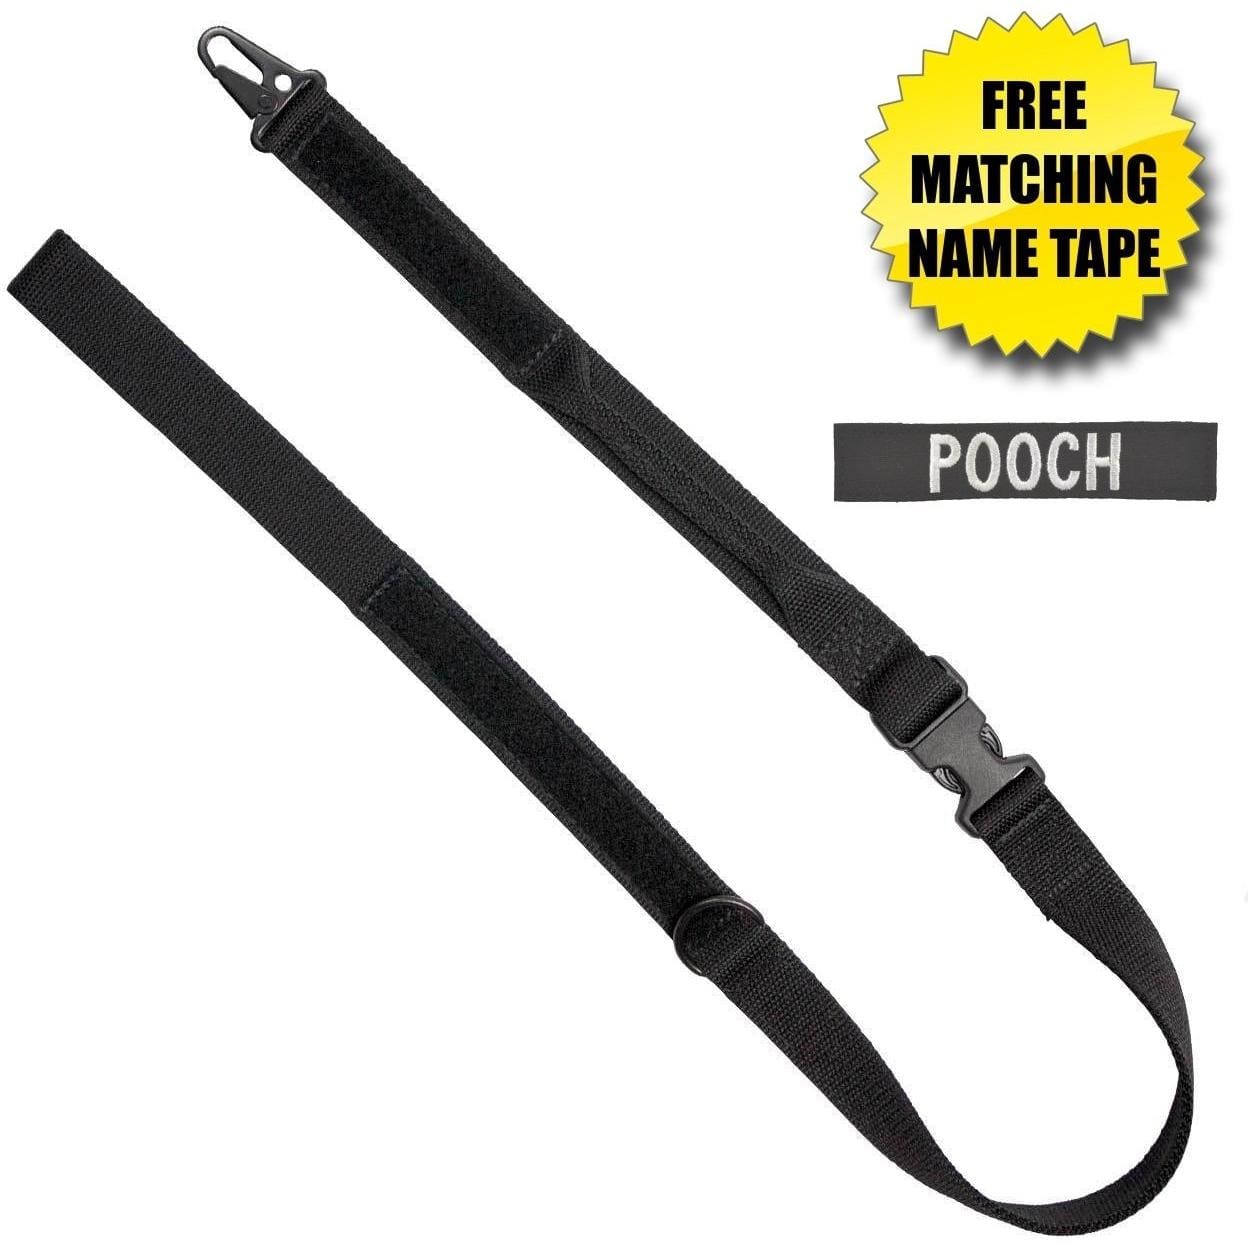 United States Tactical Tactical Gear Black United States Tactical Two-Piece Leash with HK Hook & Quick-Release Buckle